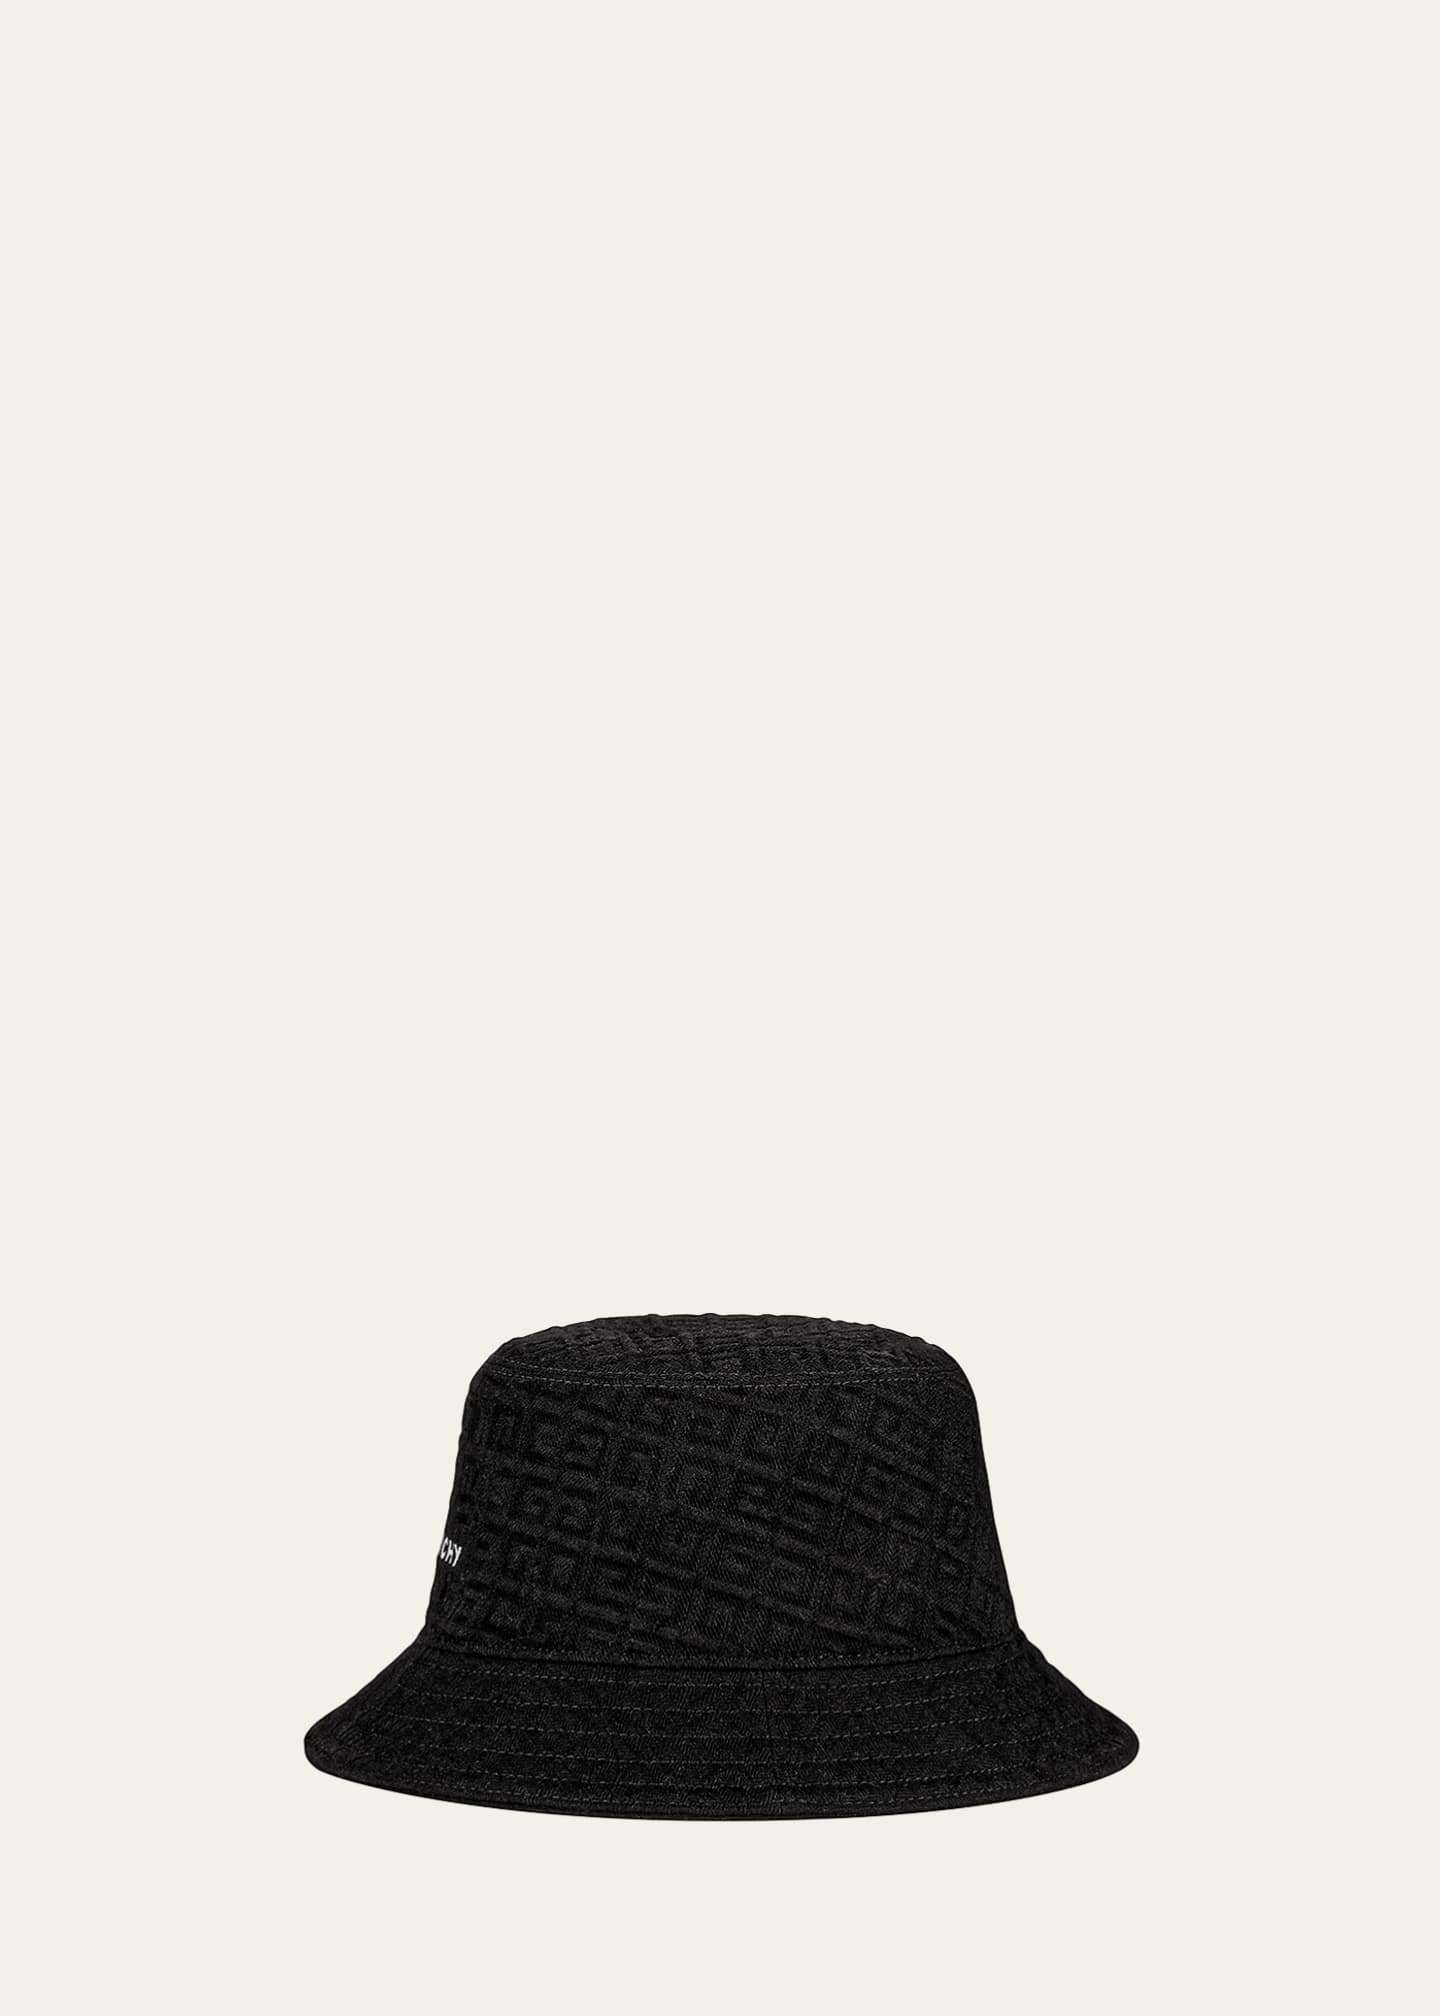 Givenchy Men's 4G Bucket Hat